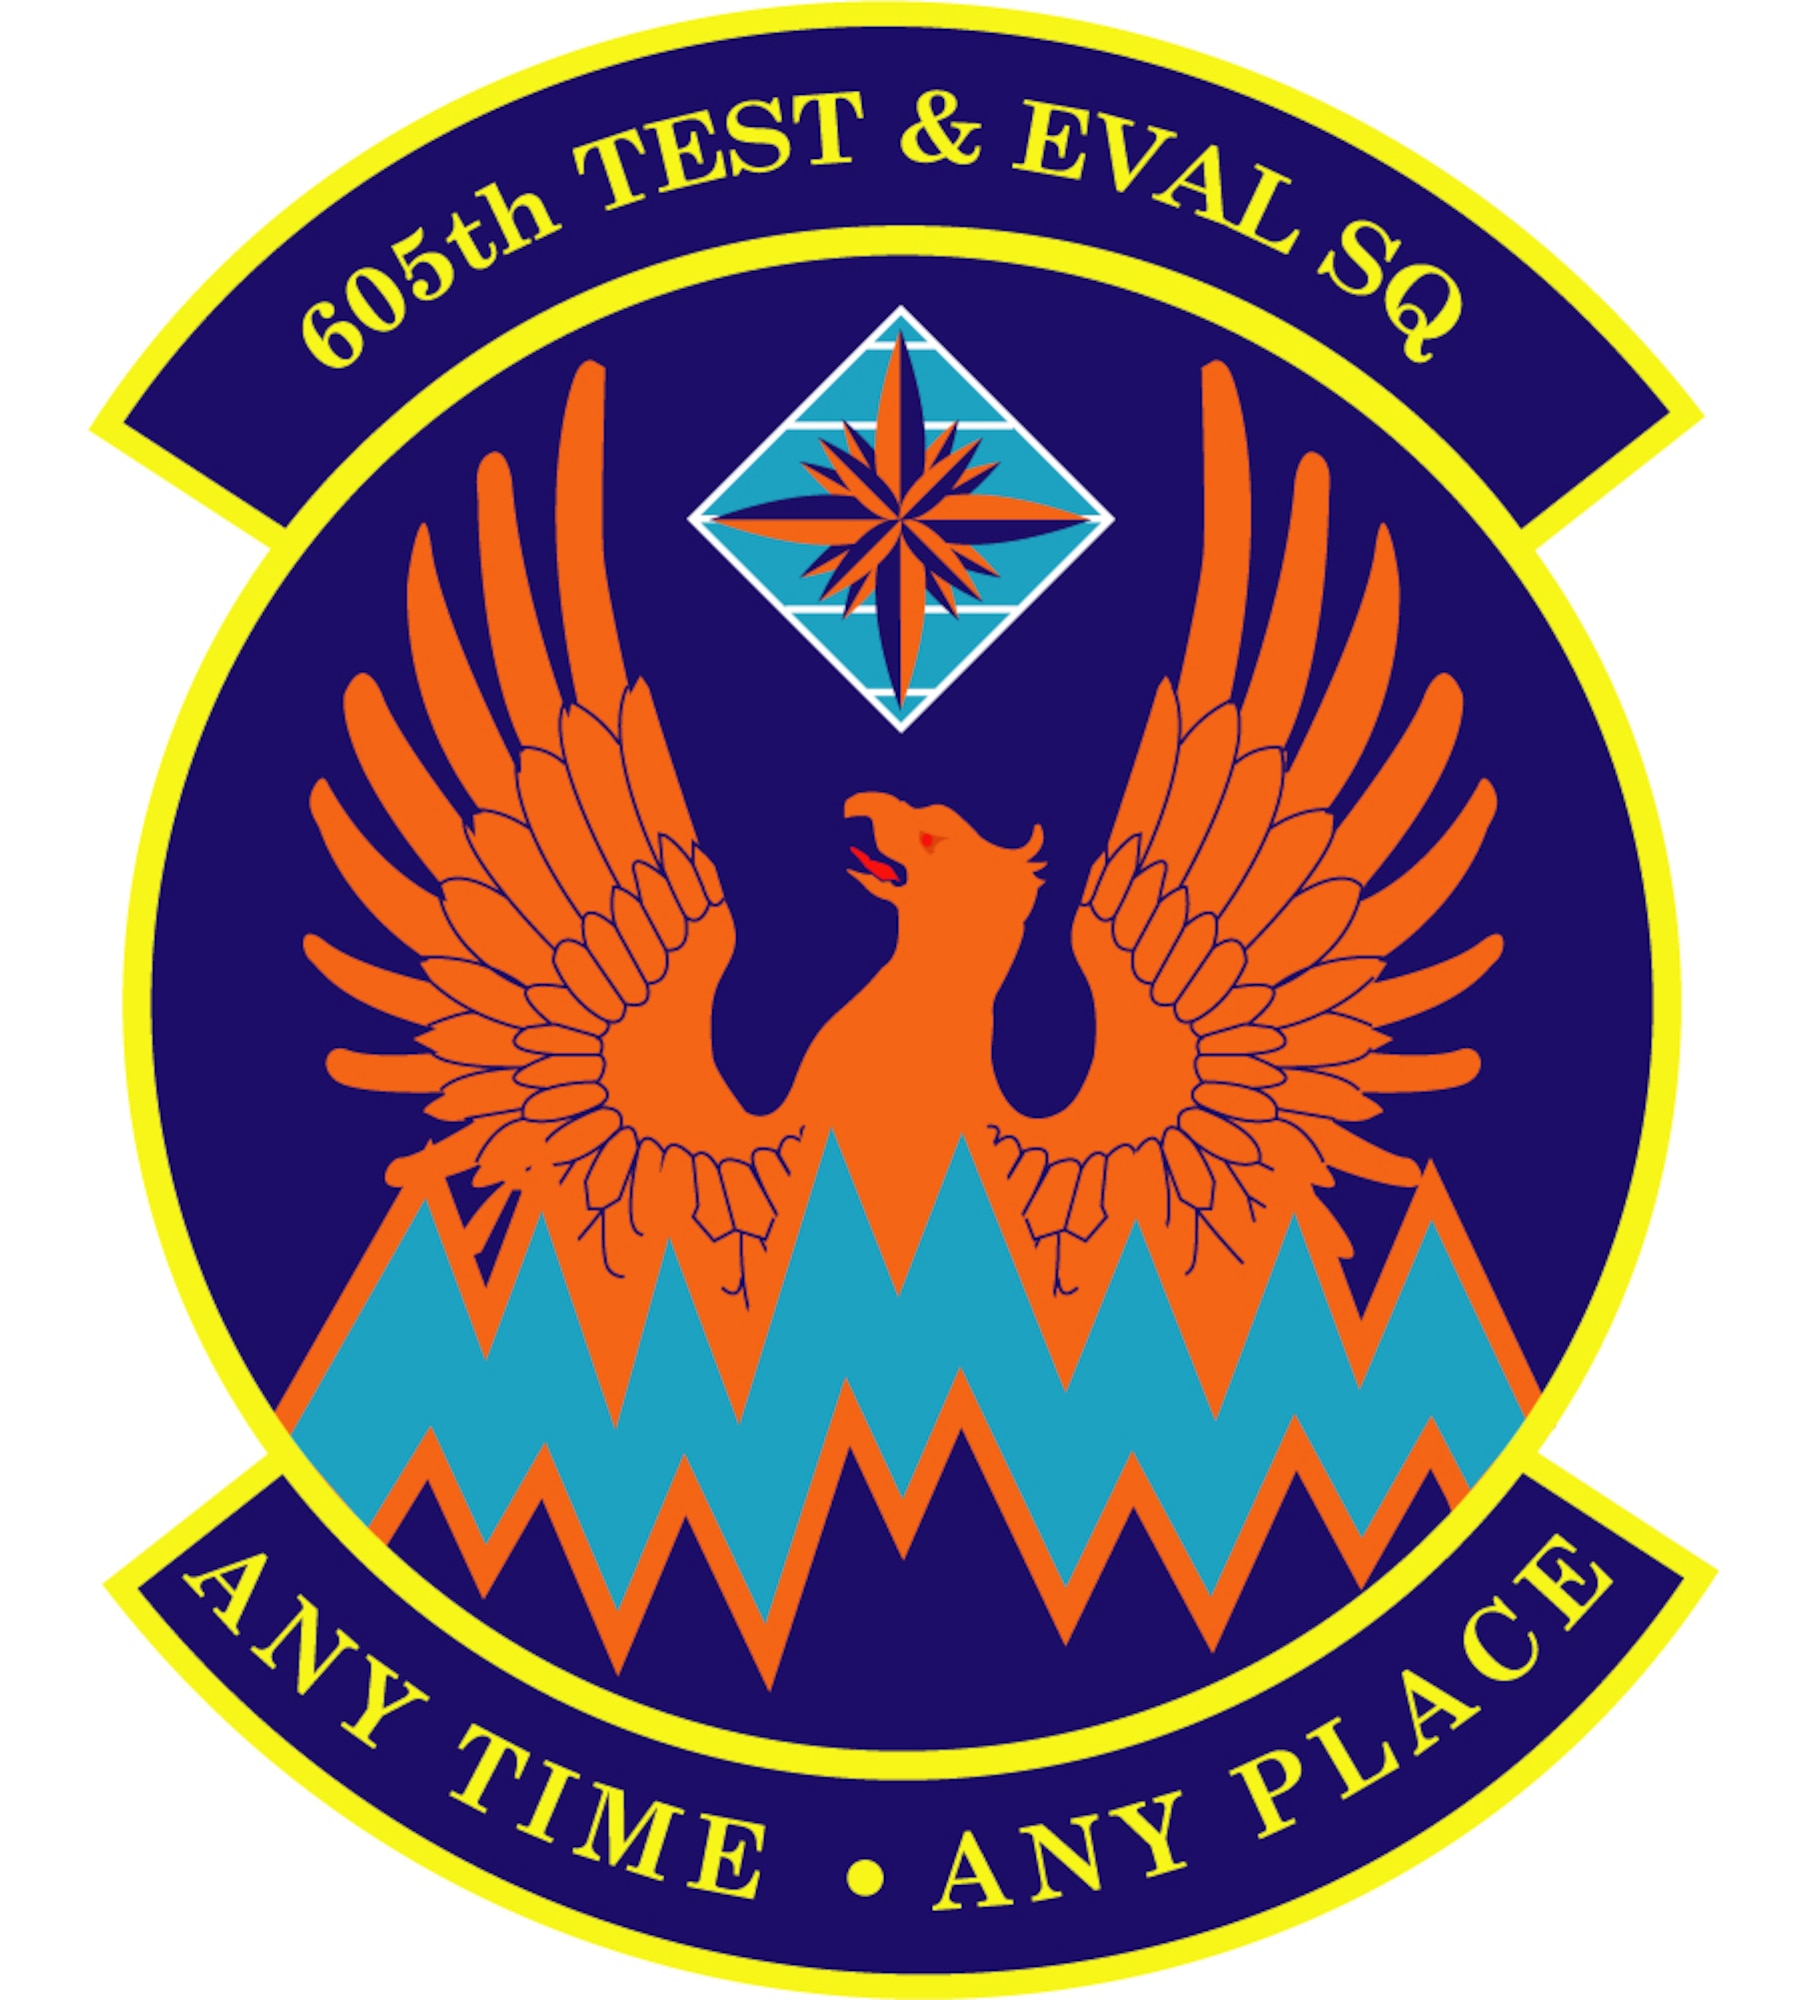 The 605th Test and Evaluation Squadron at Hurlburt Field, Fla., is a part of the 505th Test and Evaluation Group at Nellis Air Force Base, Nev., 505th Command and Control Wing at Hurlburt Field, Fla. The squadron began as the 605th Test Squadron at Eglin Air Force Base in 1993 and moved to Hurlburt Field in 1997 where it was renamed and structured under the 505 CCW in 2004.(U.S. Air Force graphic)